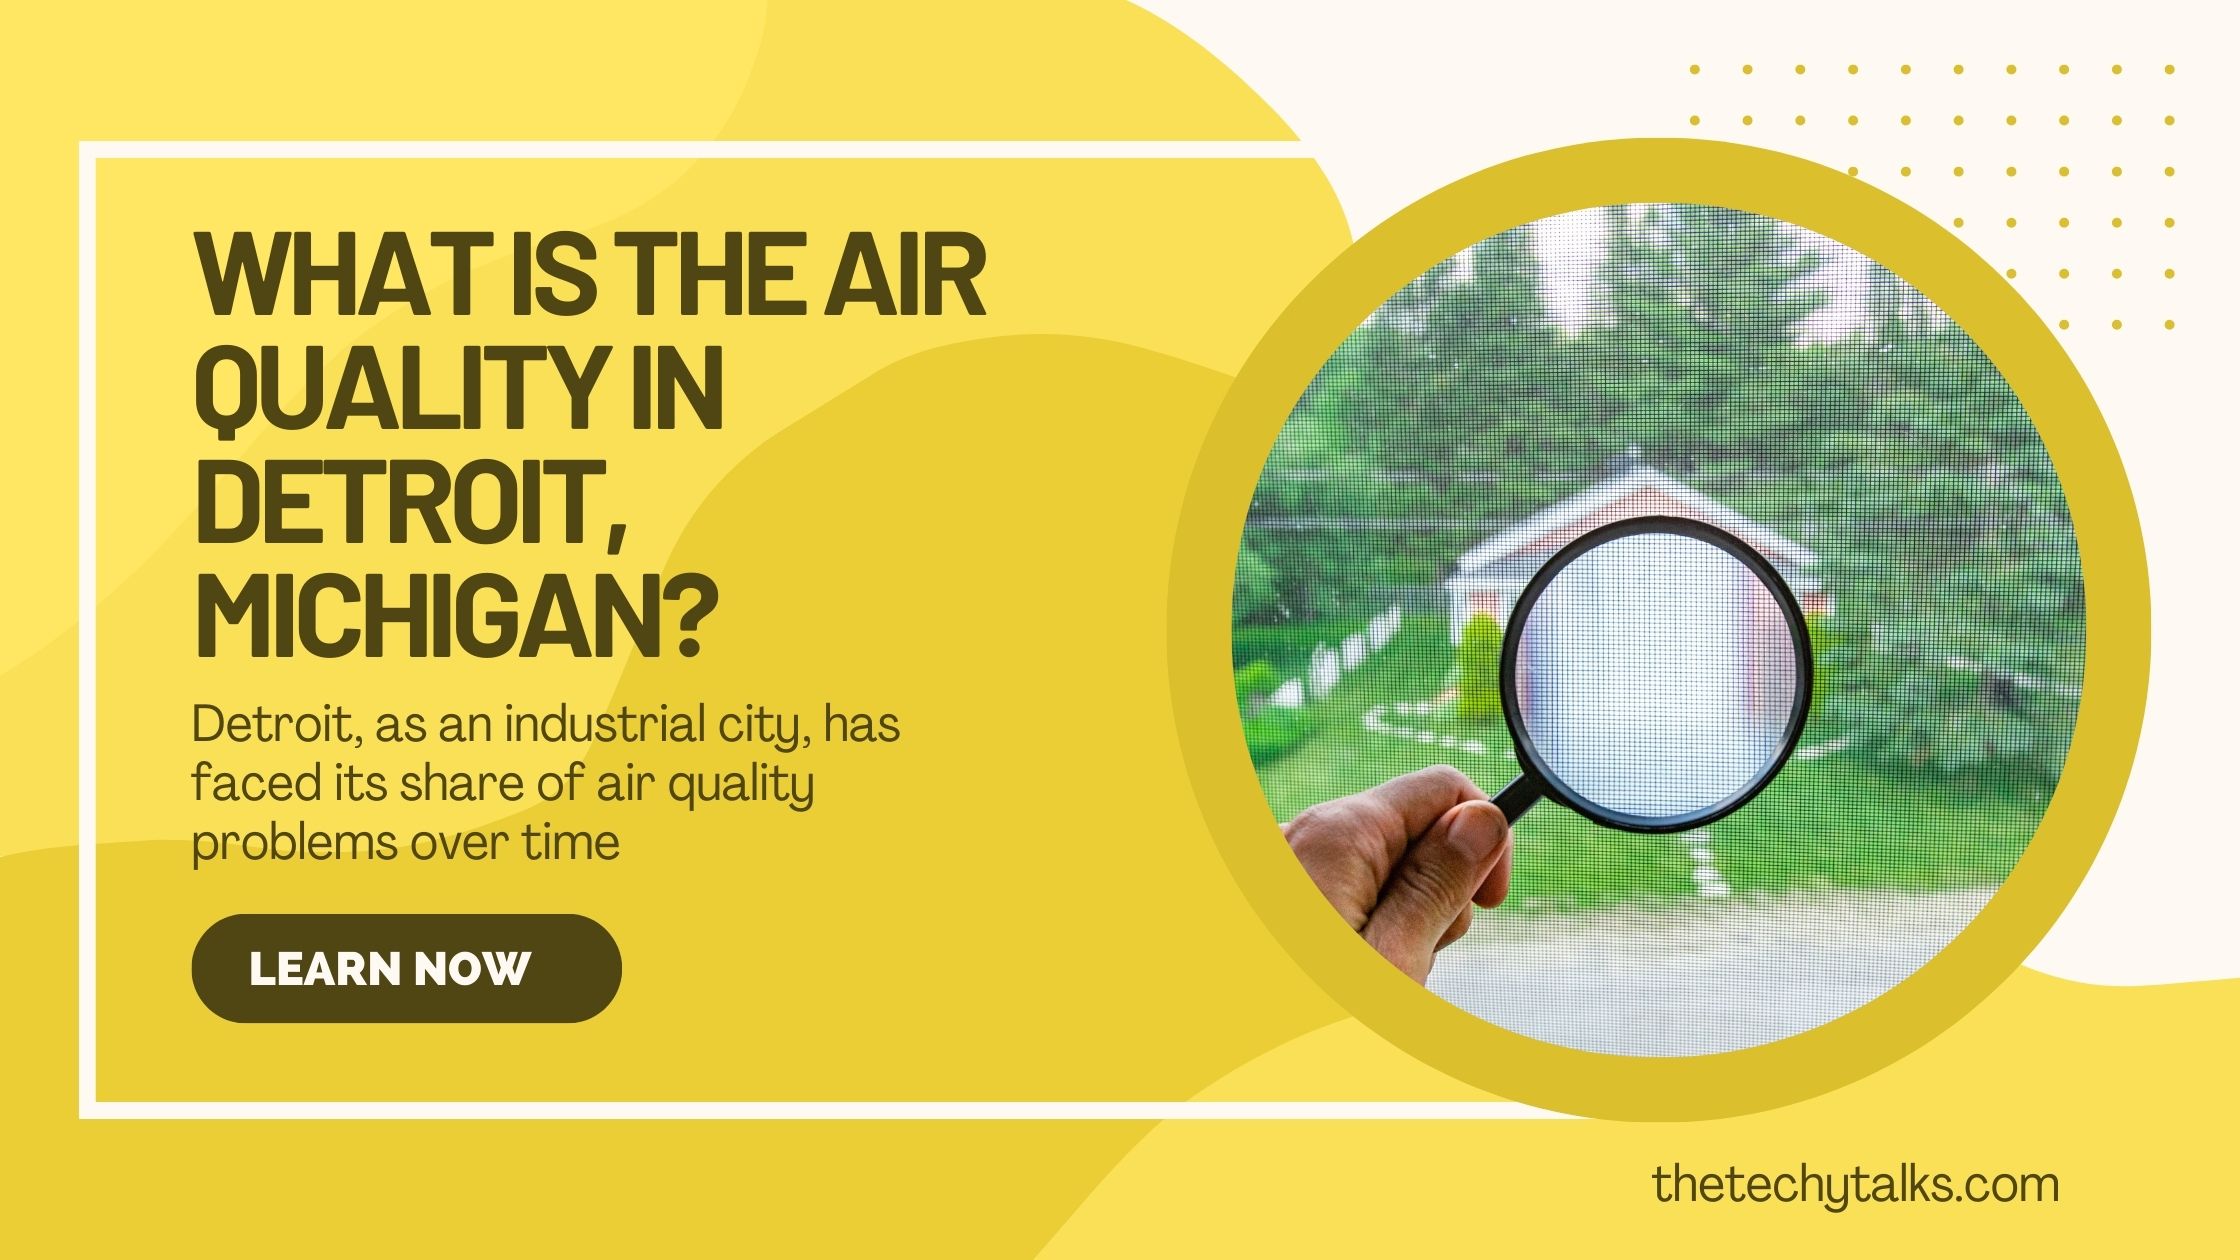 What is the Air Quality in Detroit, Michigan?